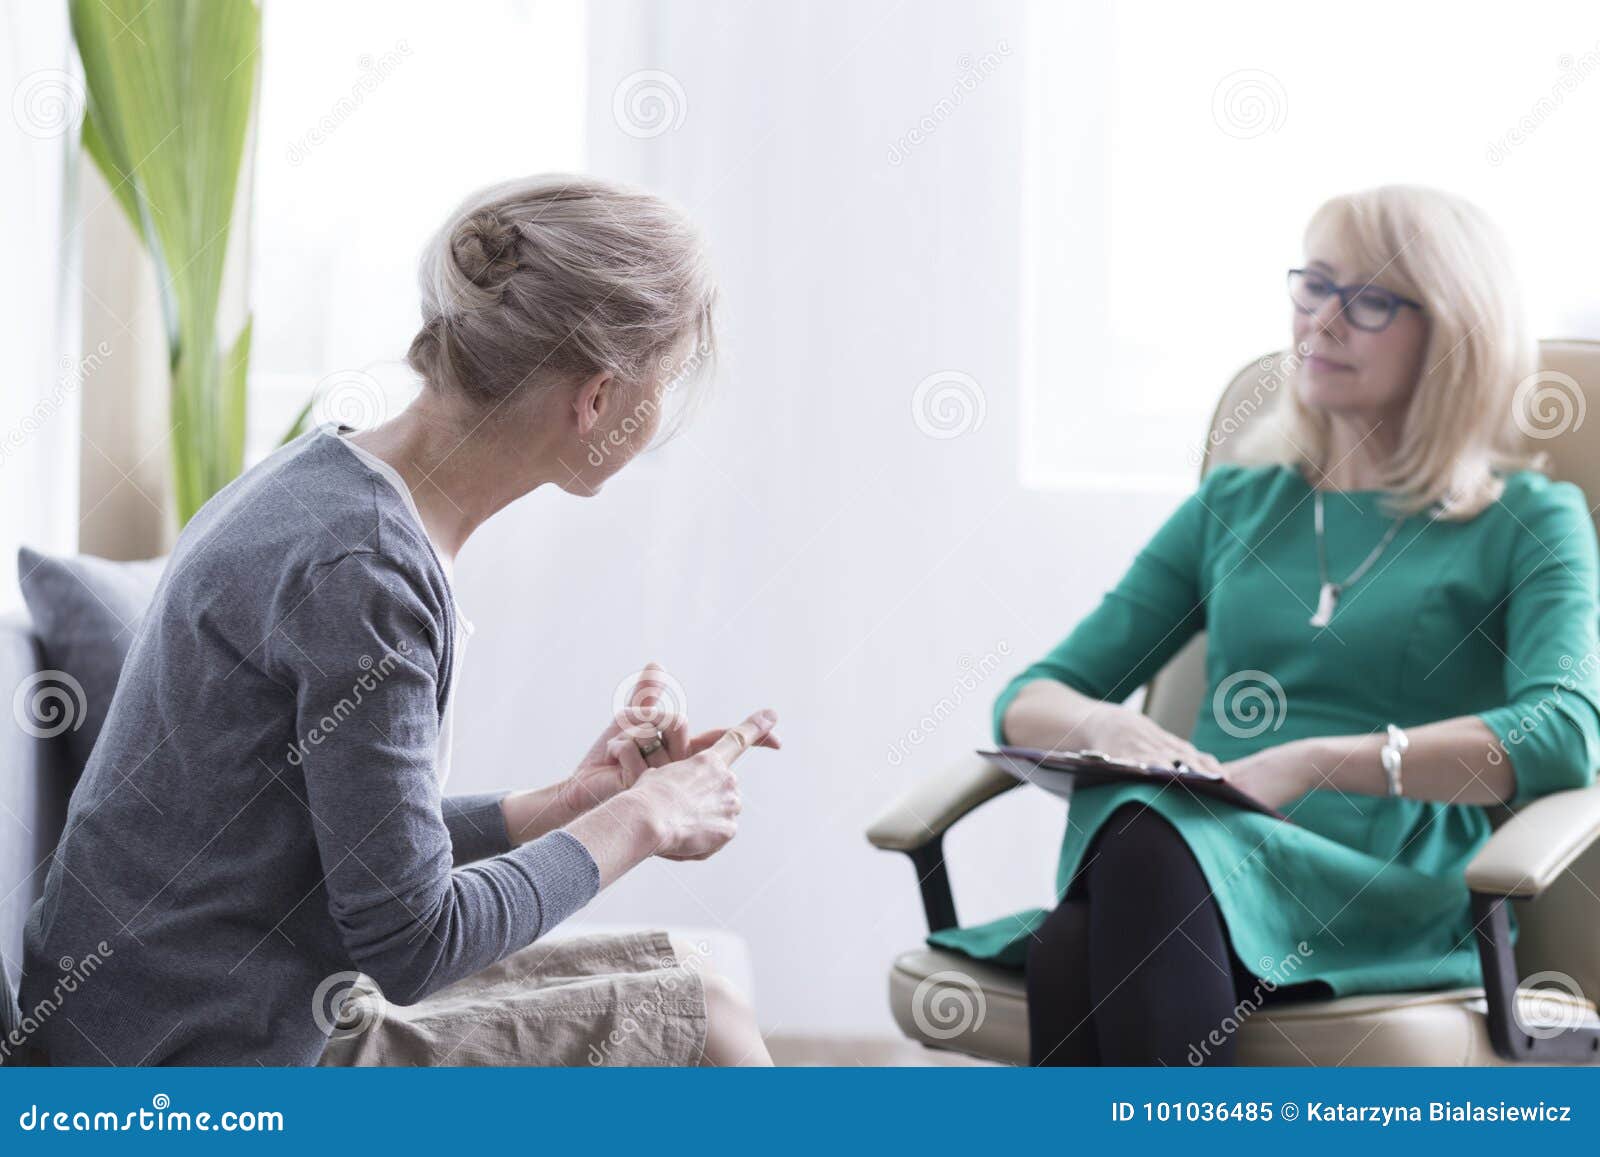 female patient talking with therapist